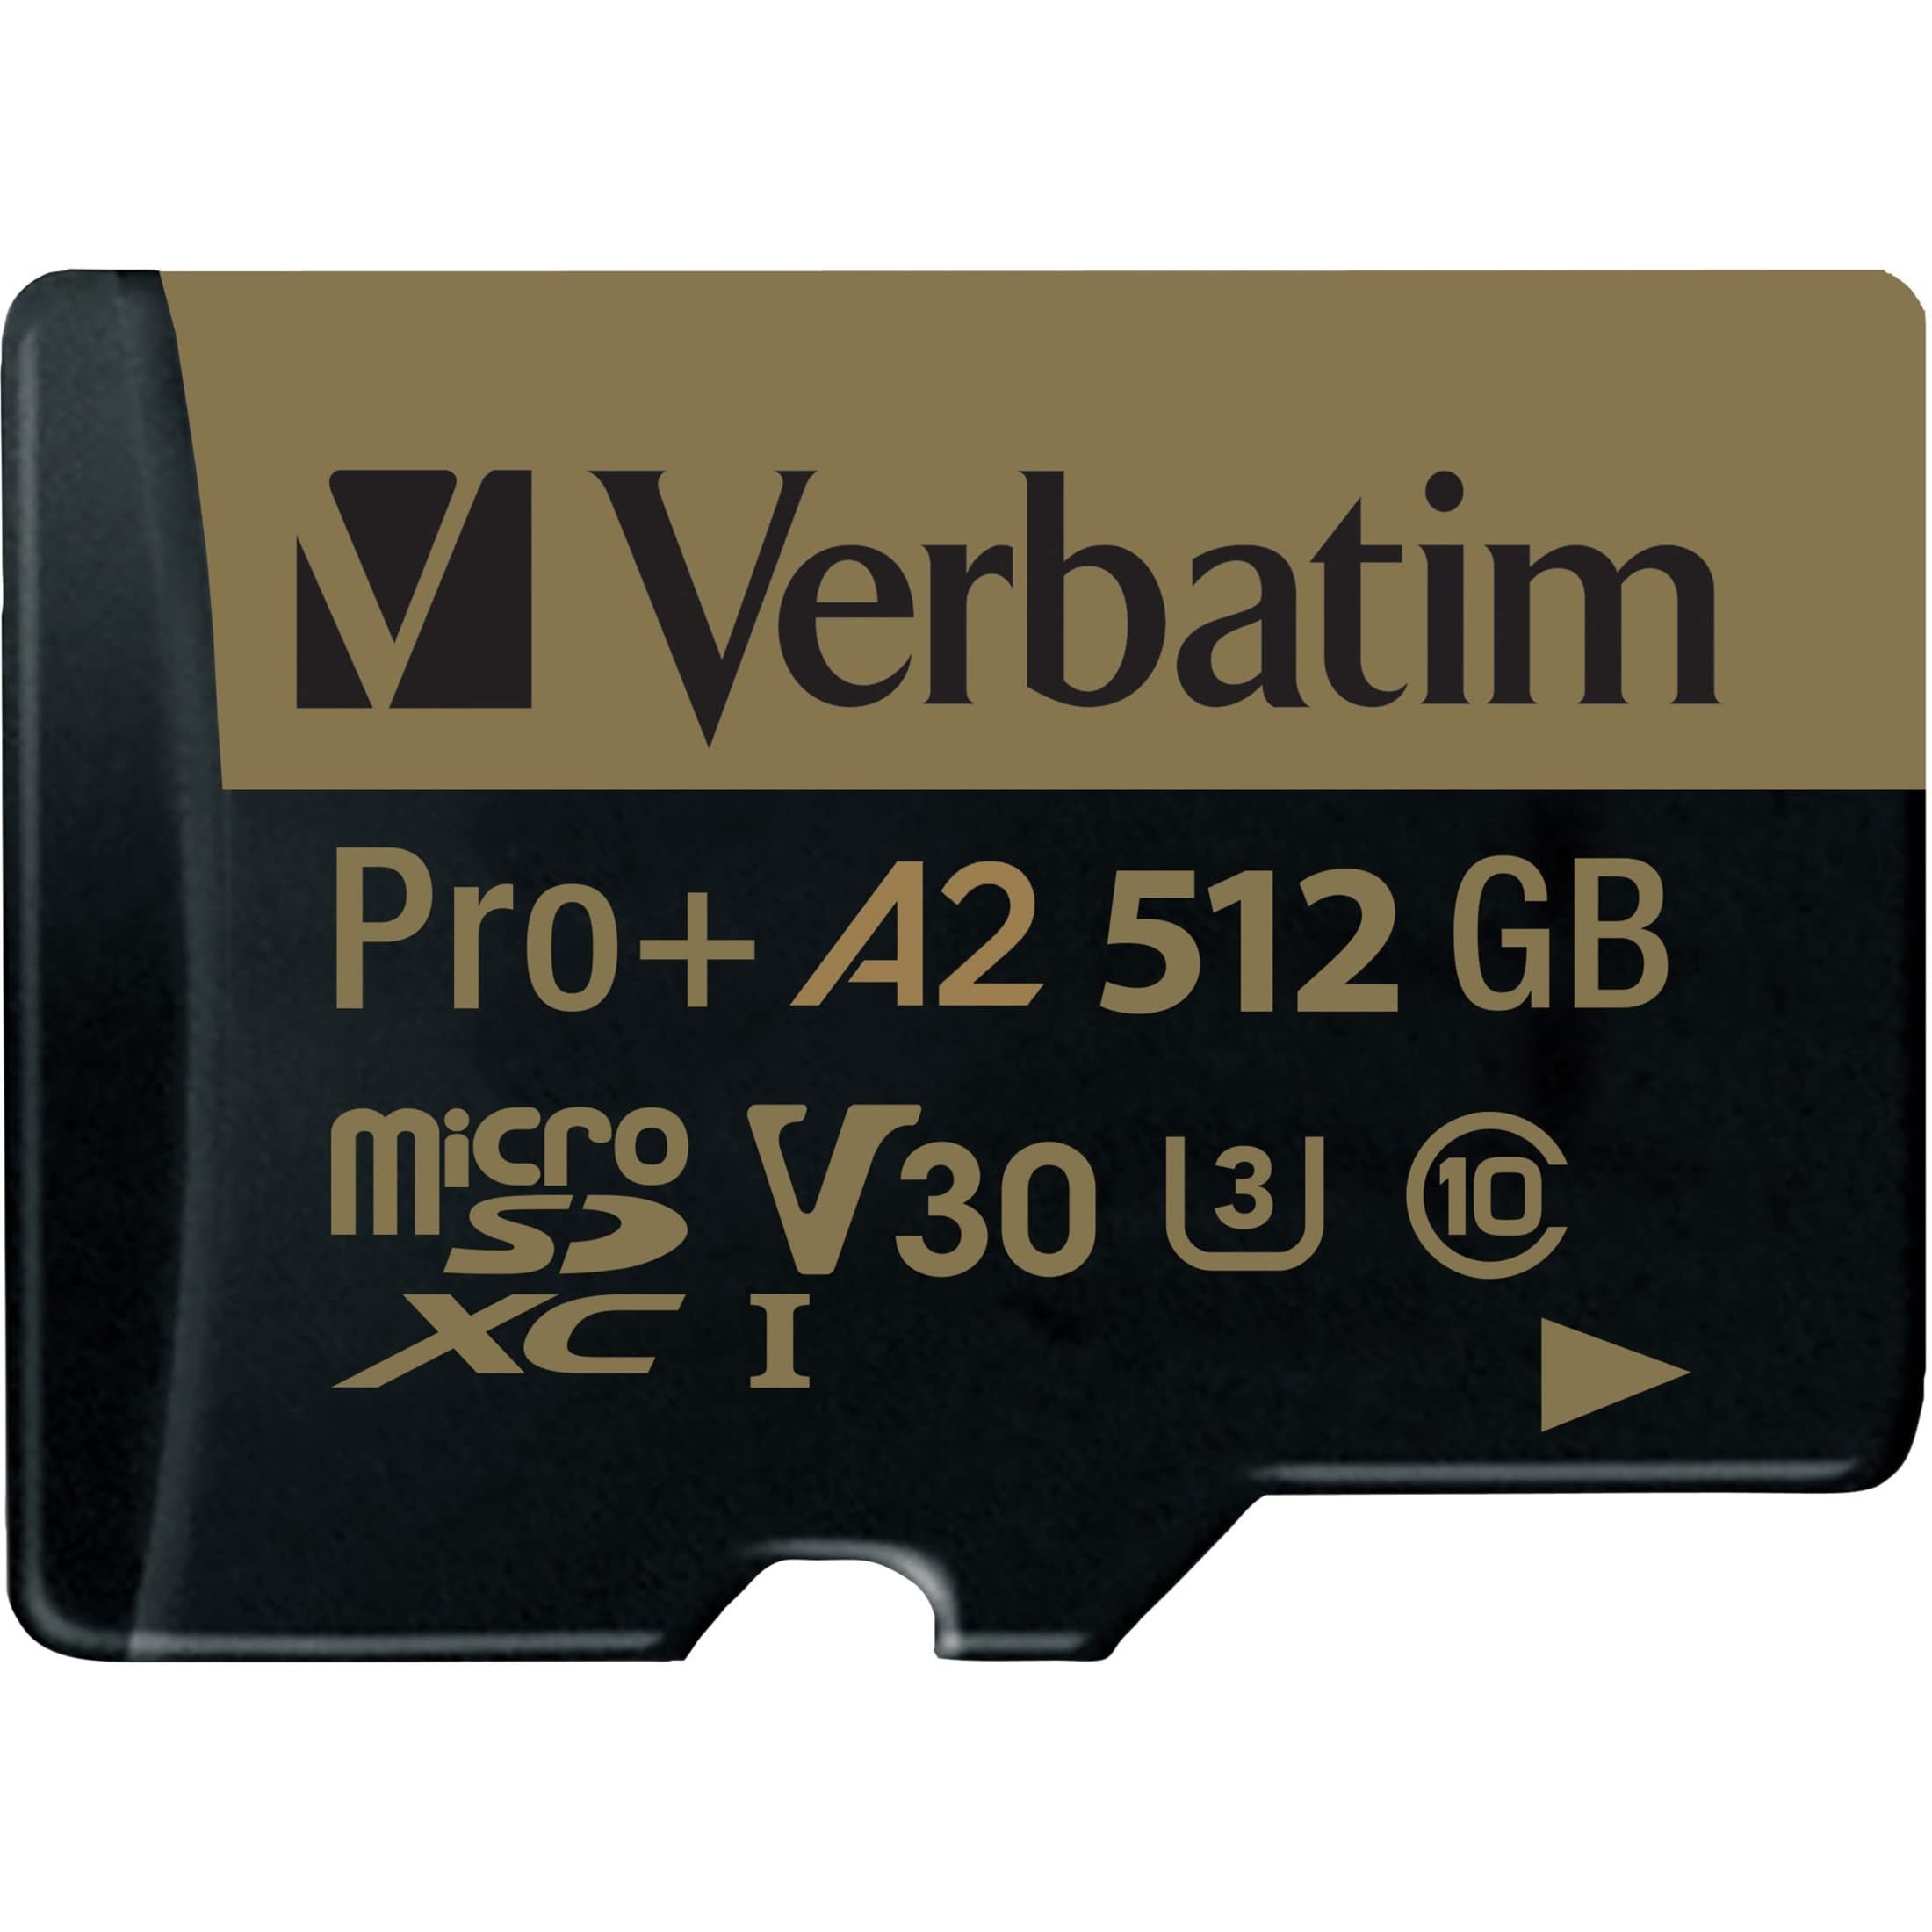 Verbatim 512GB Pro Plus 666X microSDXC Memory Card with Adapter, UHS-I V30 U3 Class 10 with A2 Rating (70393)